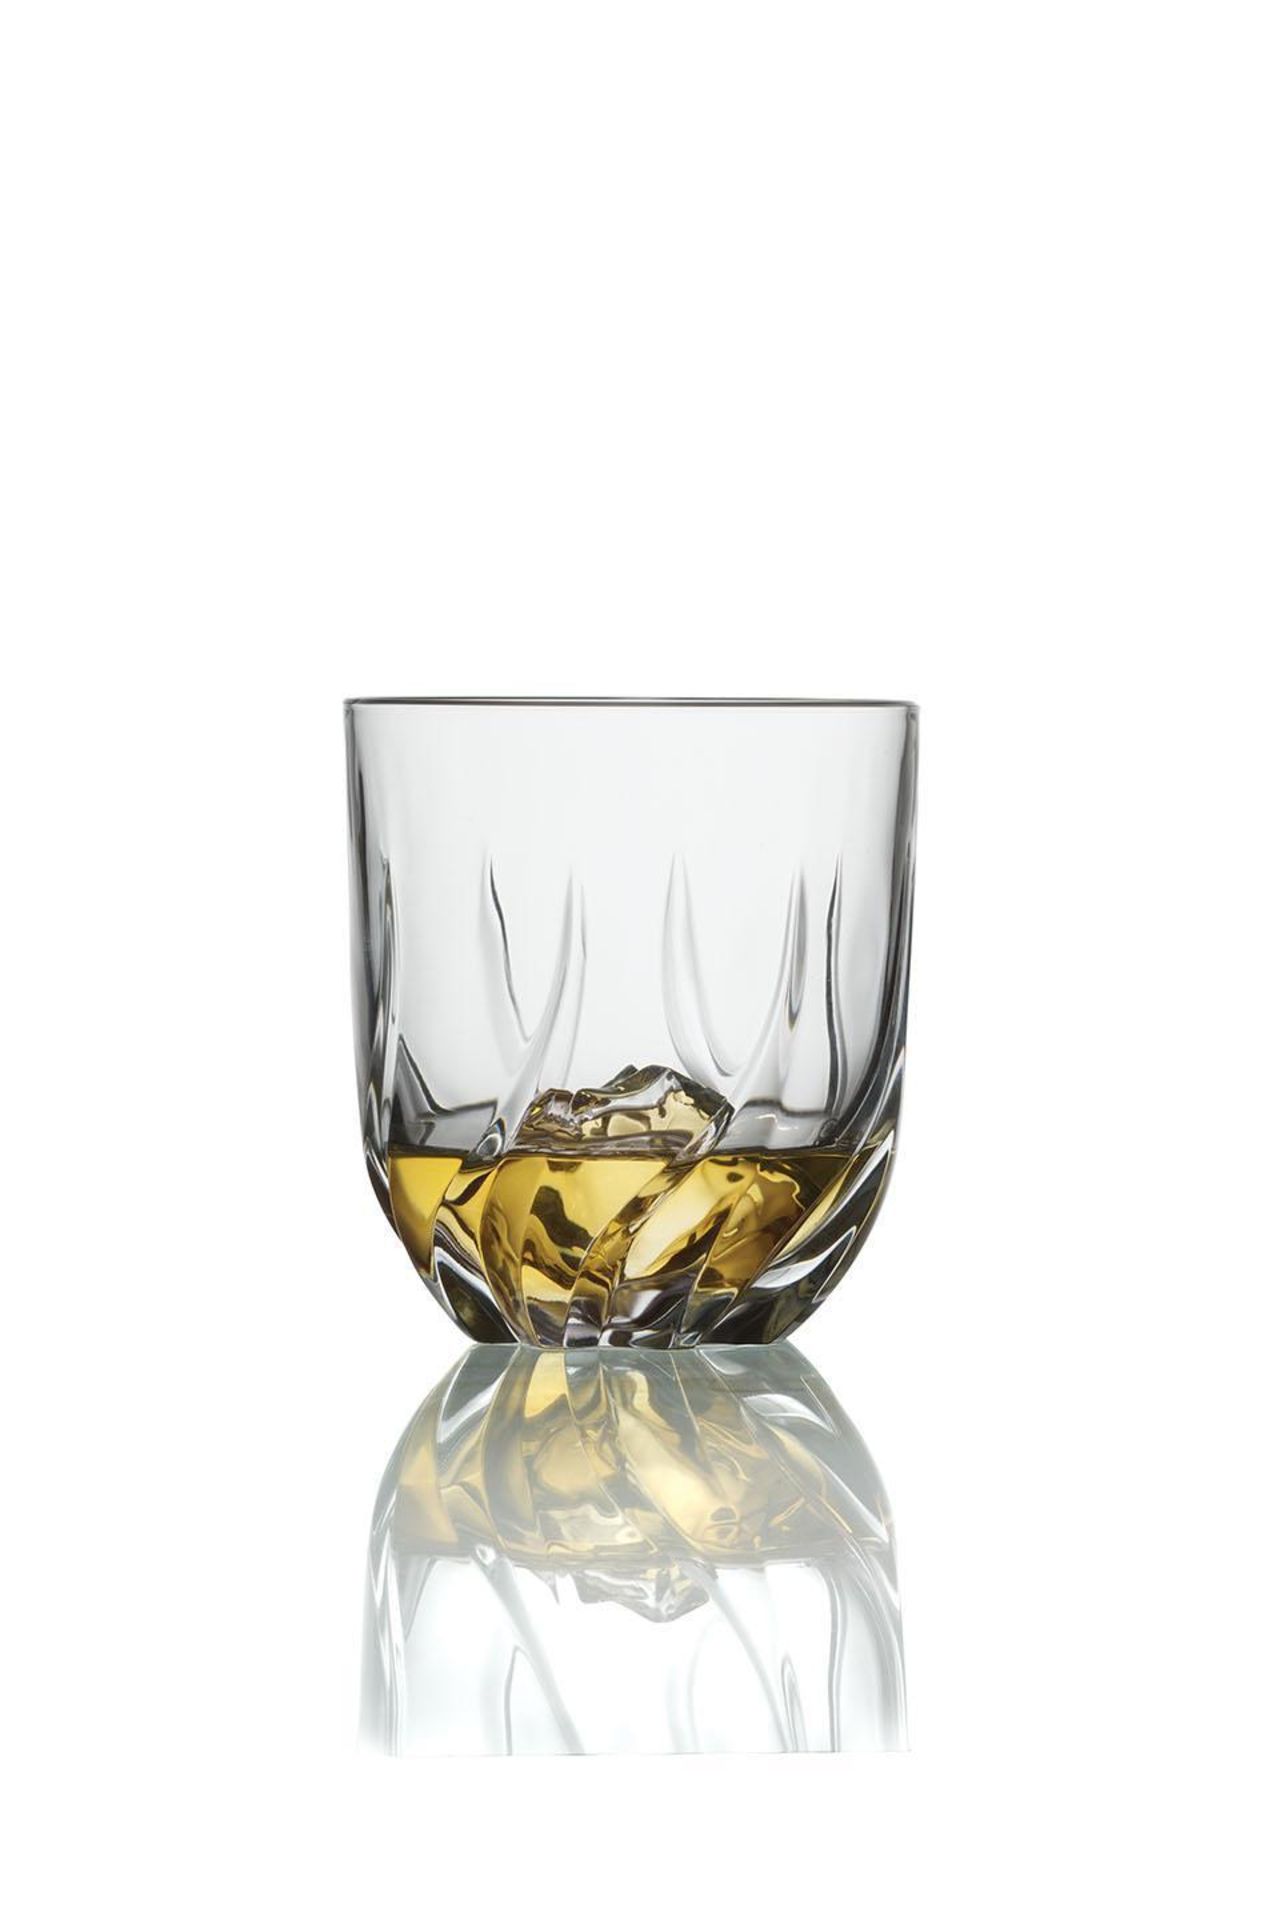 V *TRADE QTY* Brand New RCR Twist Whiskey Glasses 33cl - Made In Italy X 4 YOUR BID PRICE TO BE - Image 2 of 2